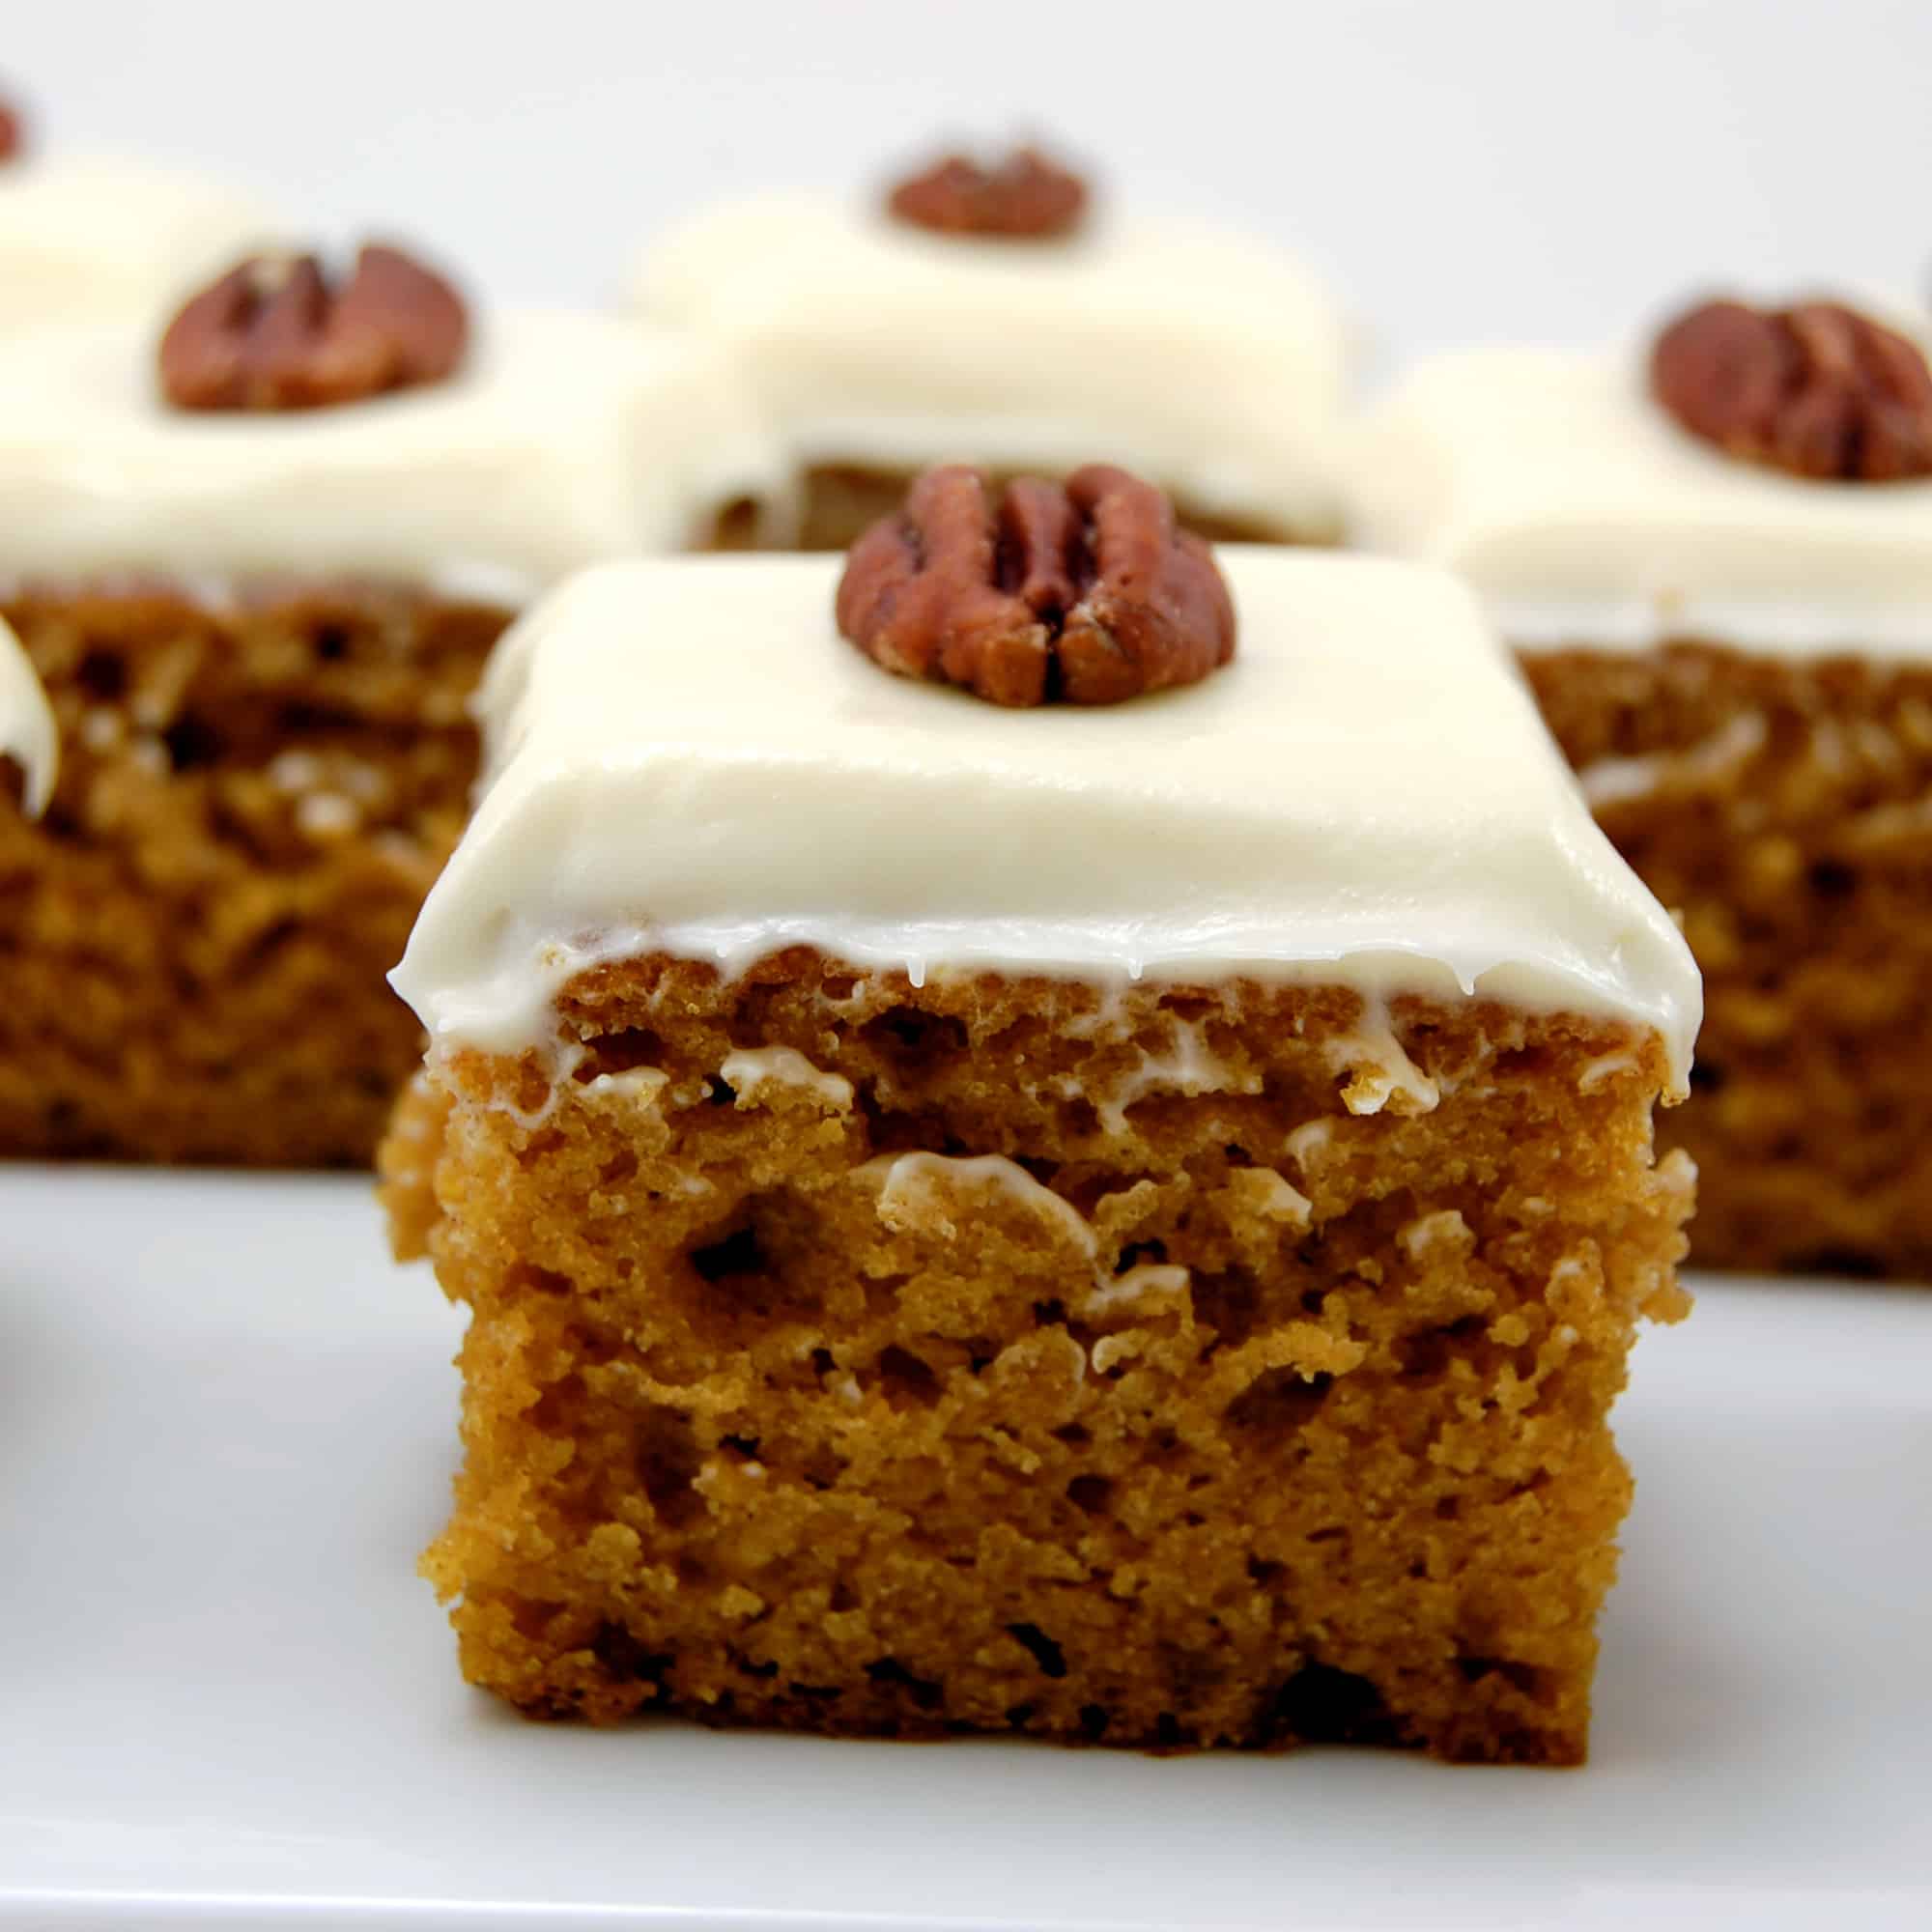 pumpkin bar with cream cheese frosting with a walnut on top